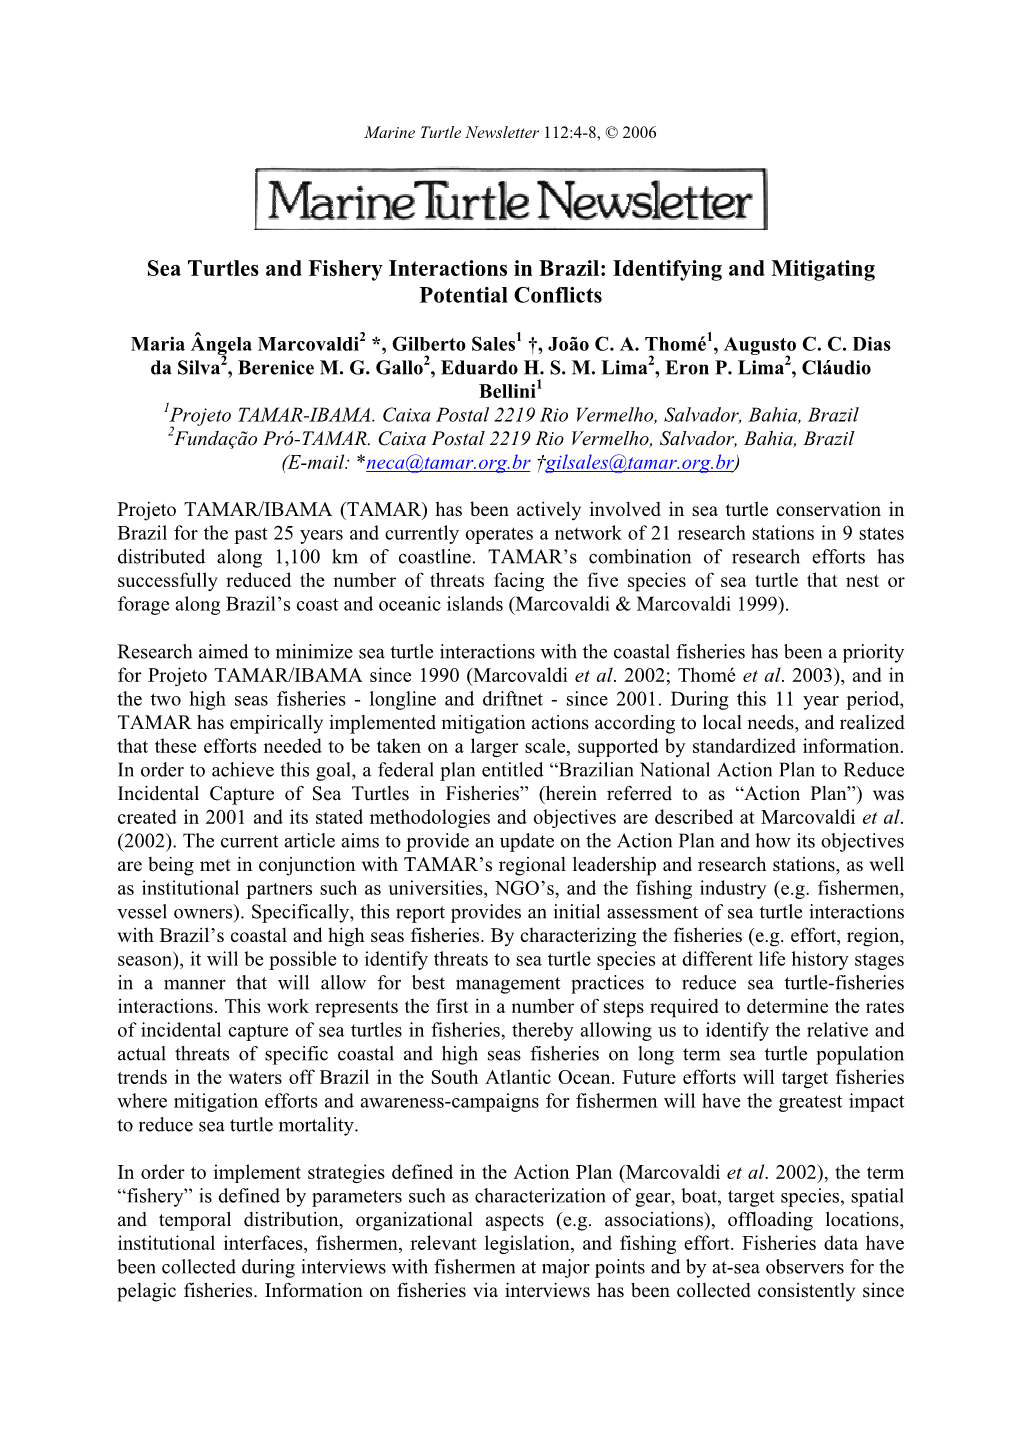 Sea Turtles and Fishery Interactions in Brazil: Identifying and Mitigating Potential Conflicts